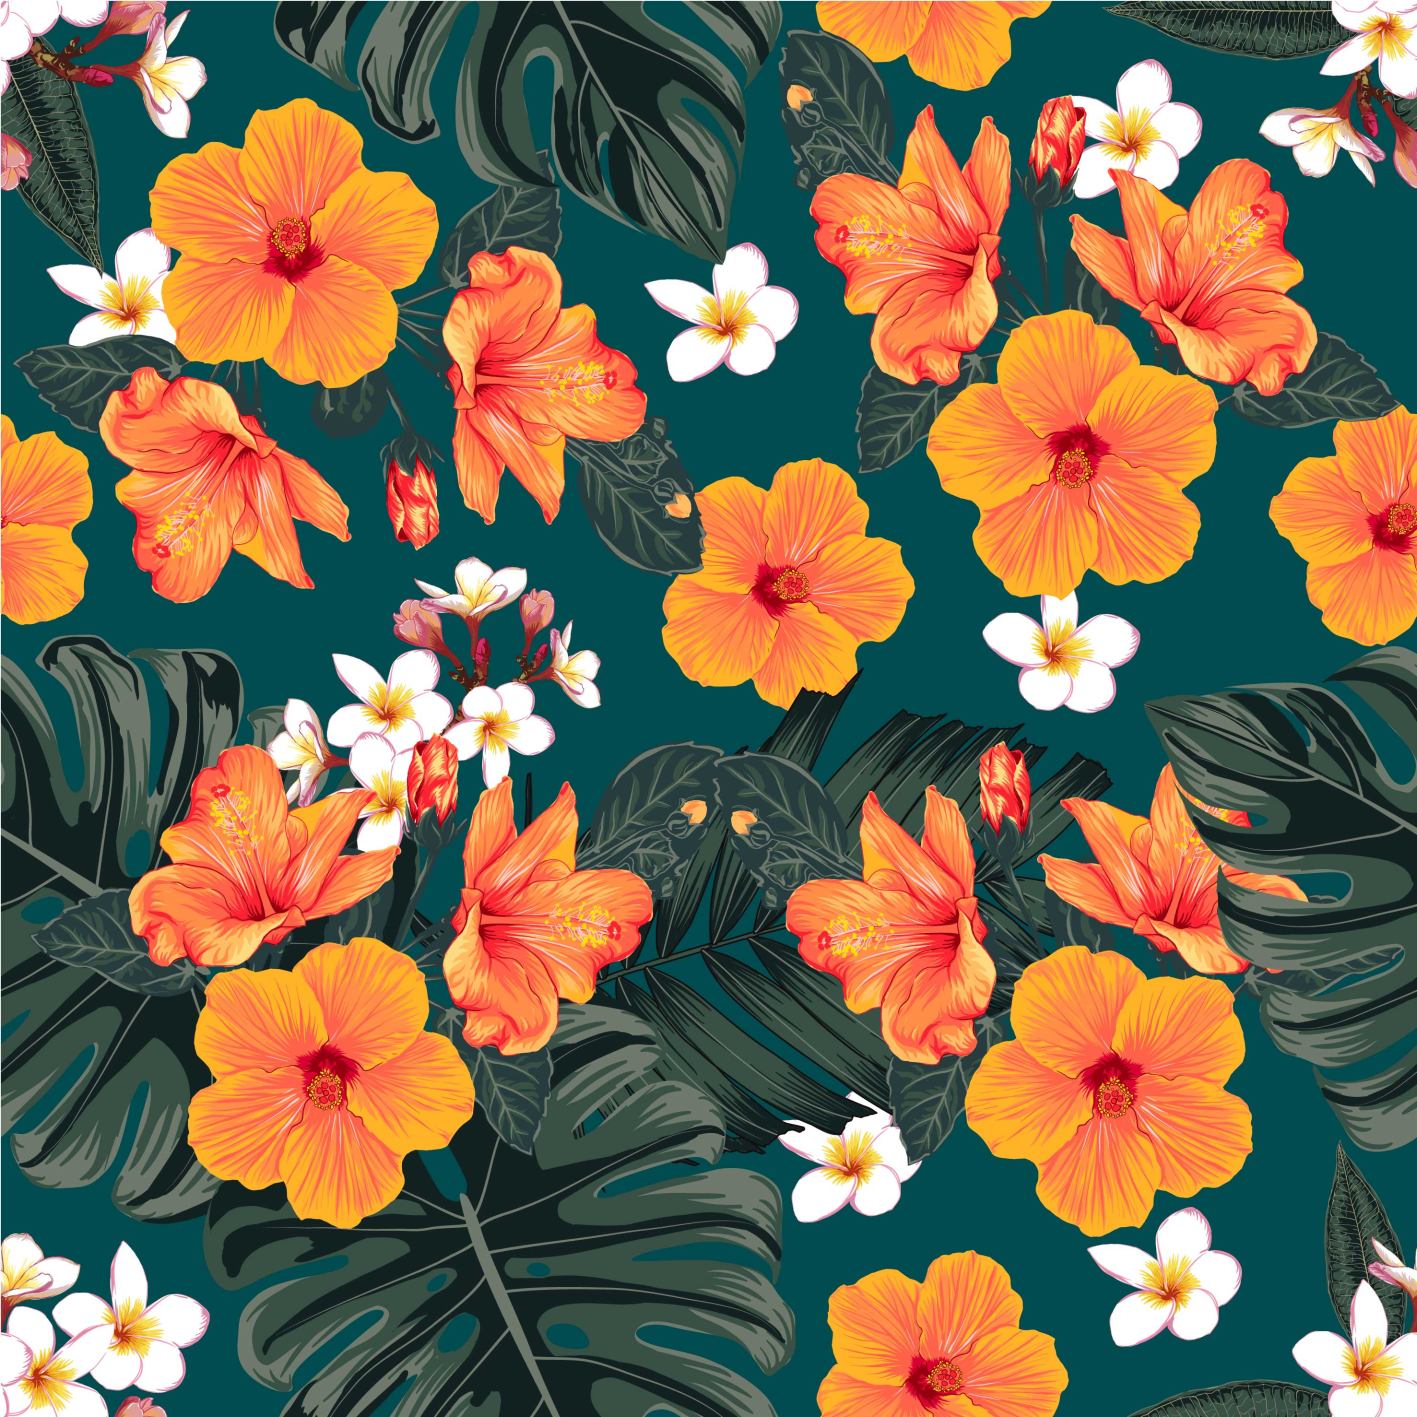 Large atypical orange flower decals for furniture - TenStickers